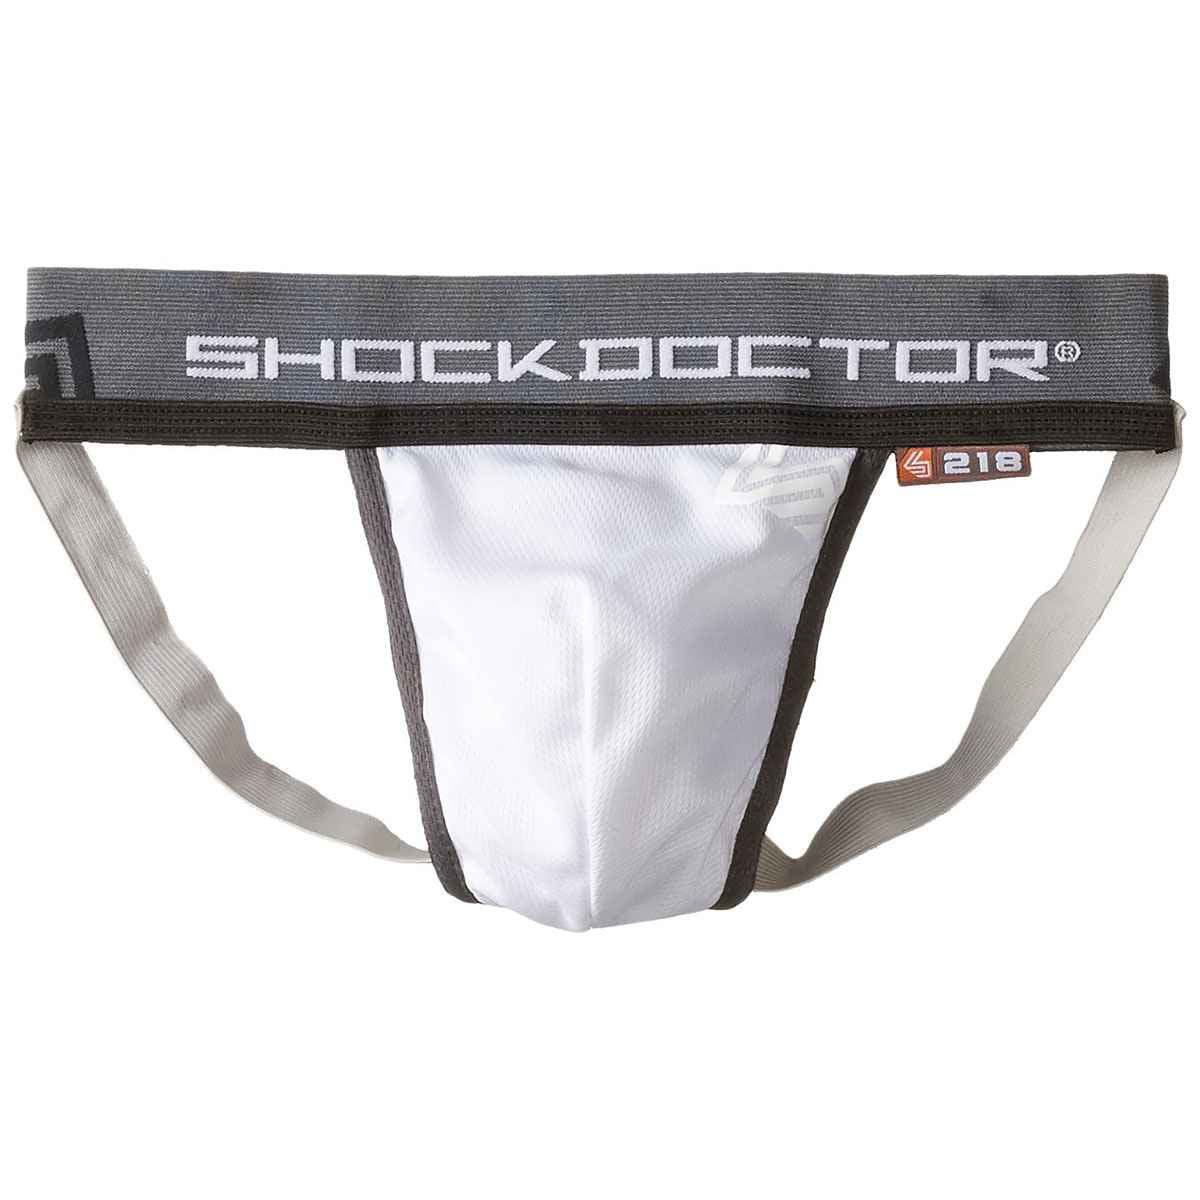 Mens McDavid 3133 Athletic Supporter Swim Run 2 Pack White Size Small for sale online 